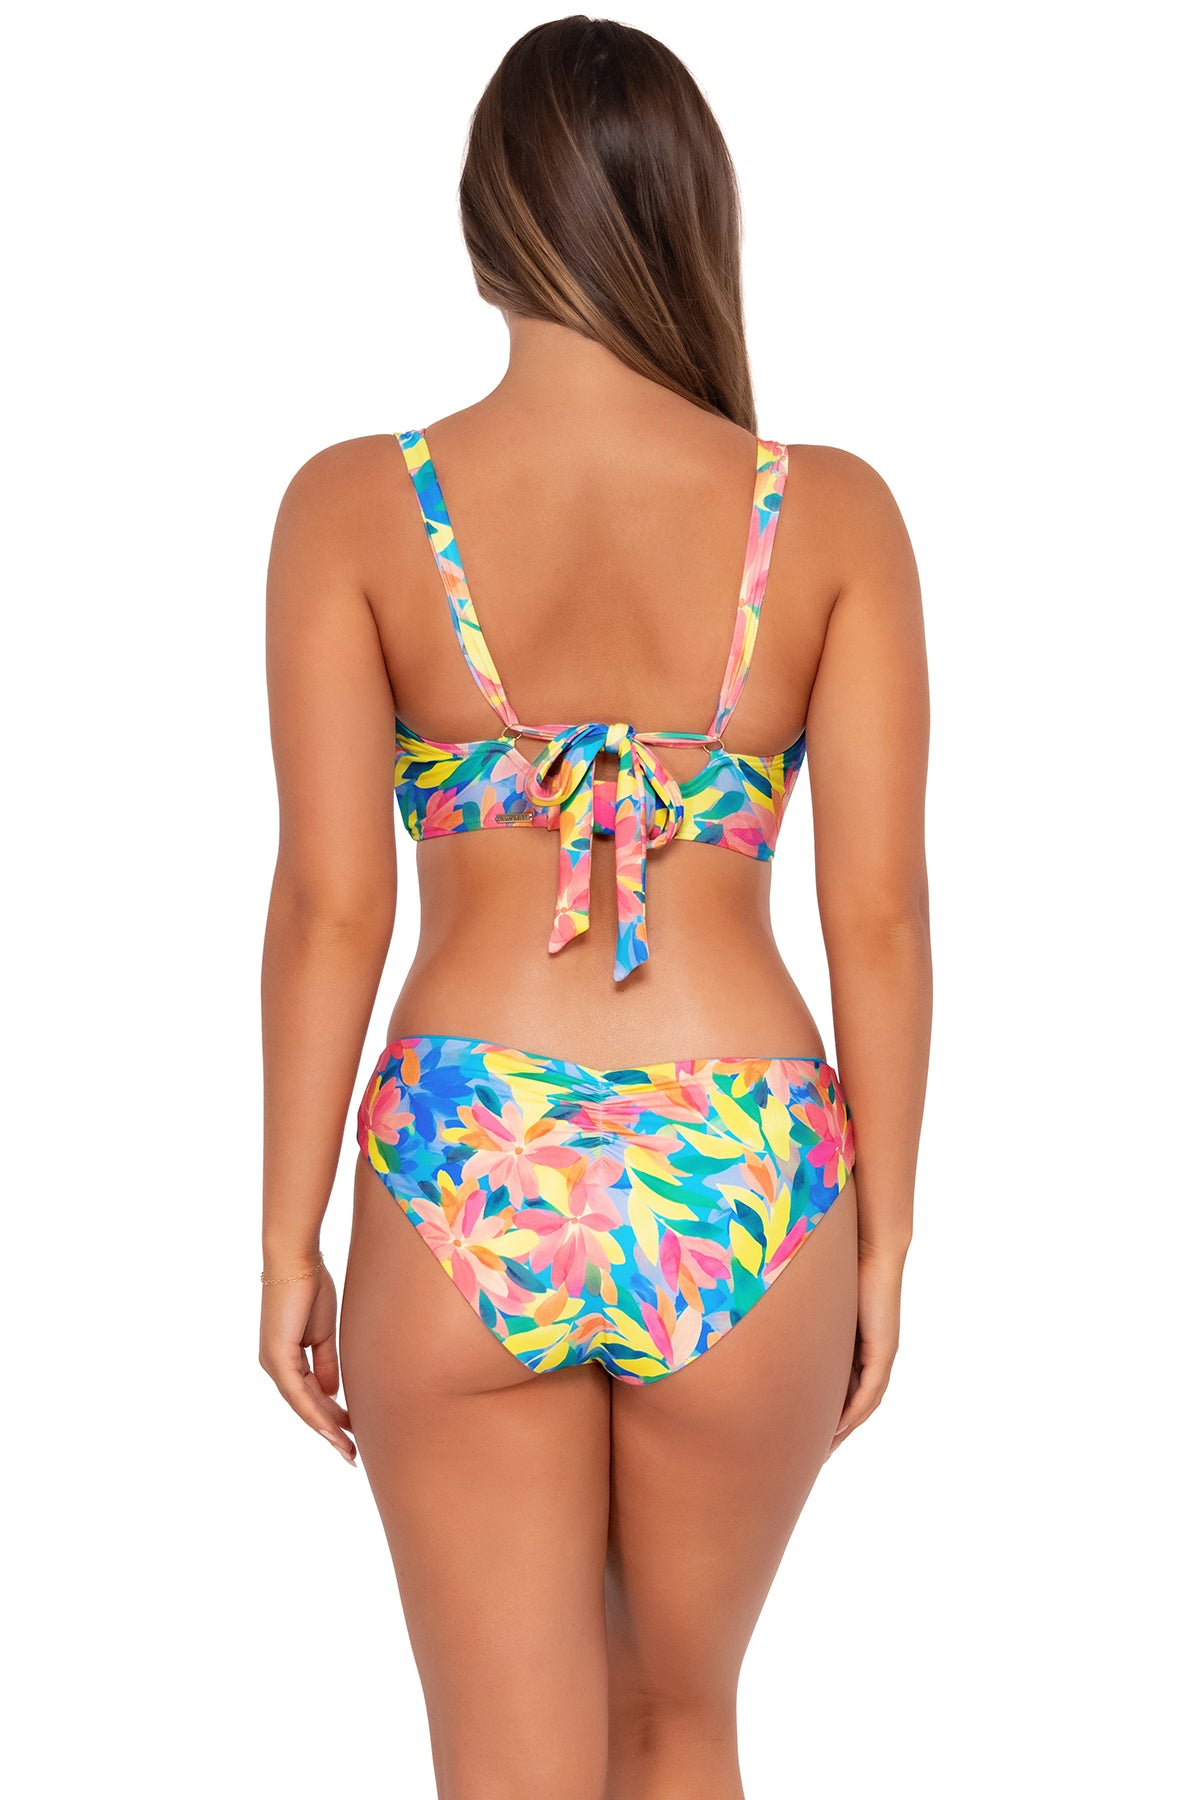 Back pose #1 of Taylor wearing Sunsets Shoreline Petals Vienna V-Wire Top with matching Alana Reversible Hipster bikini bottom